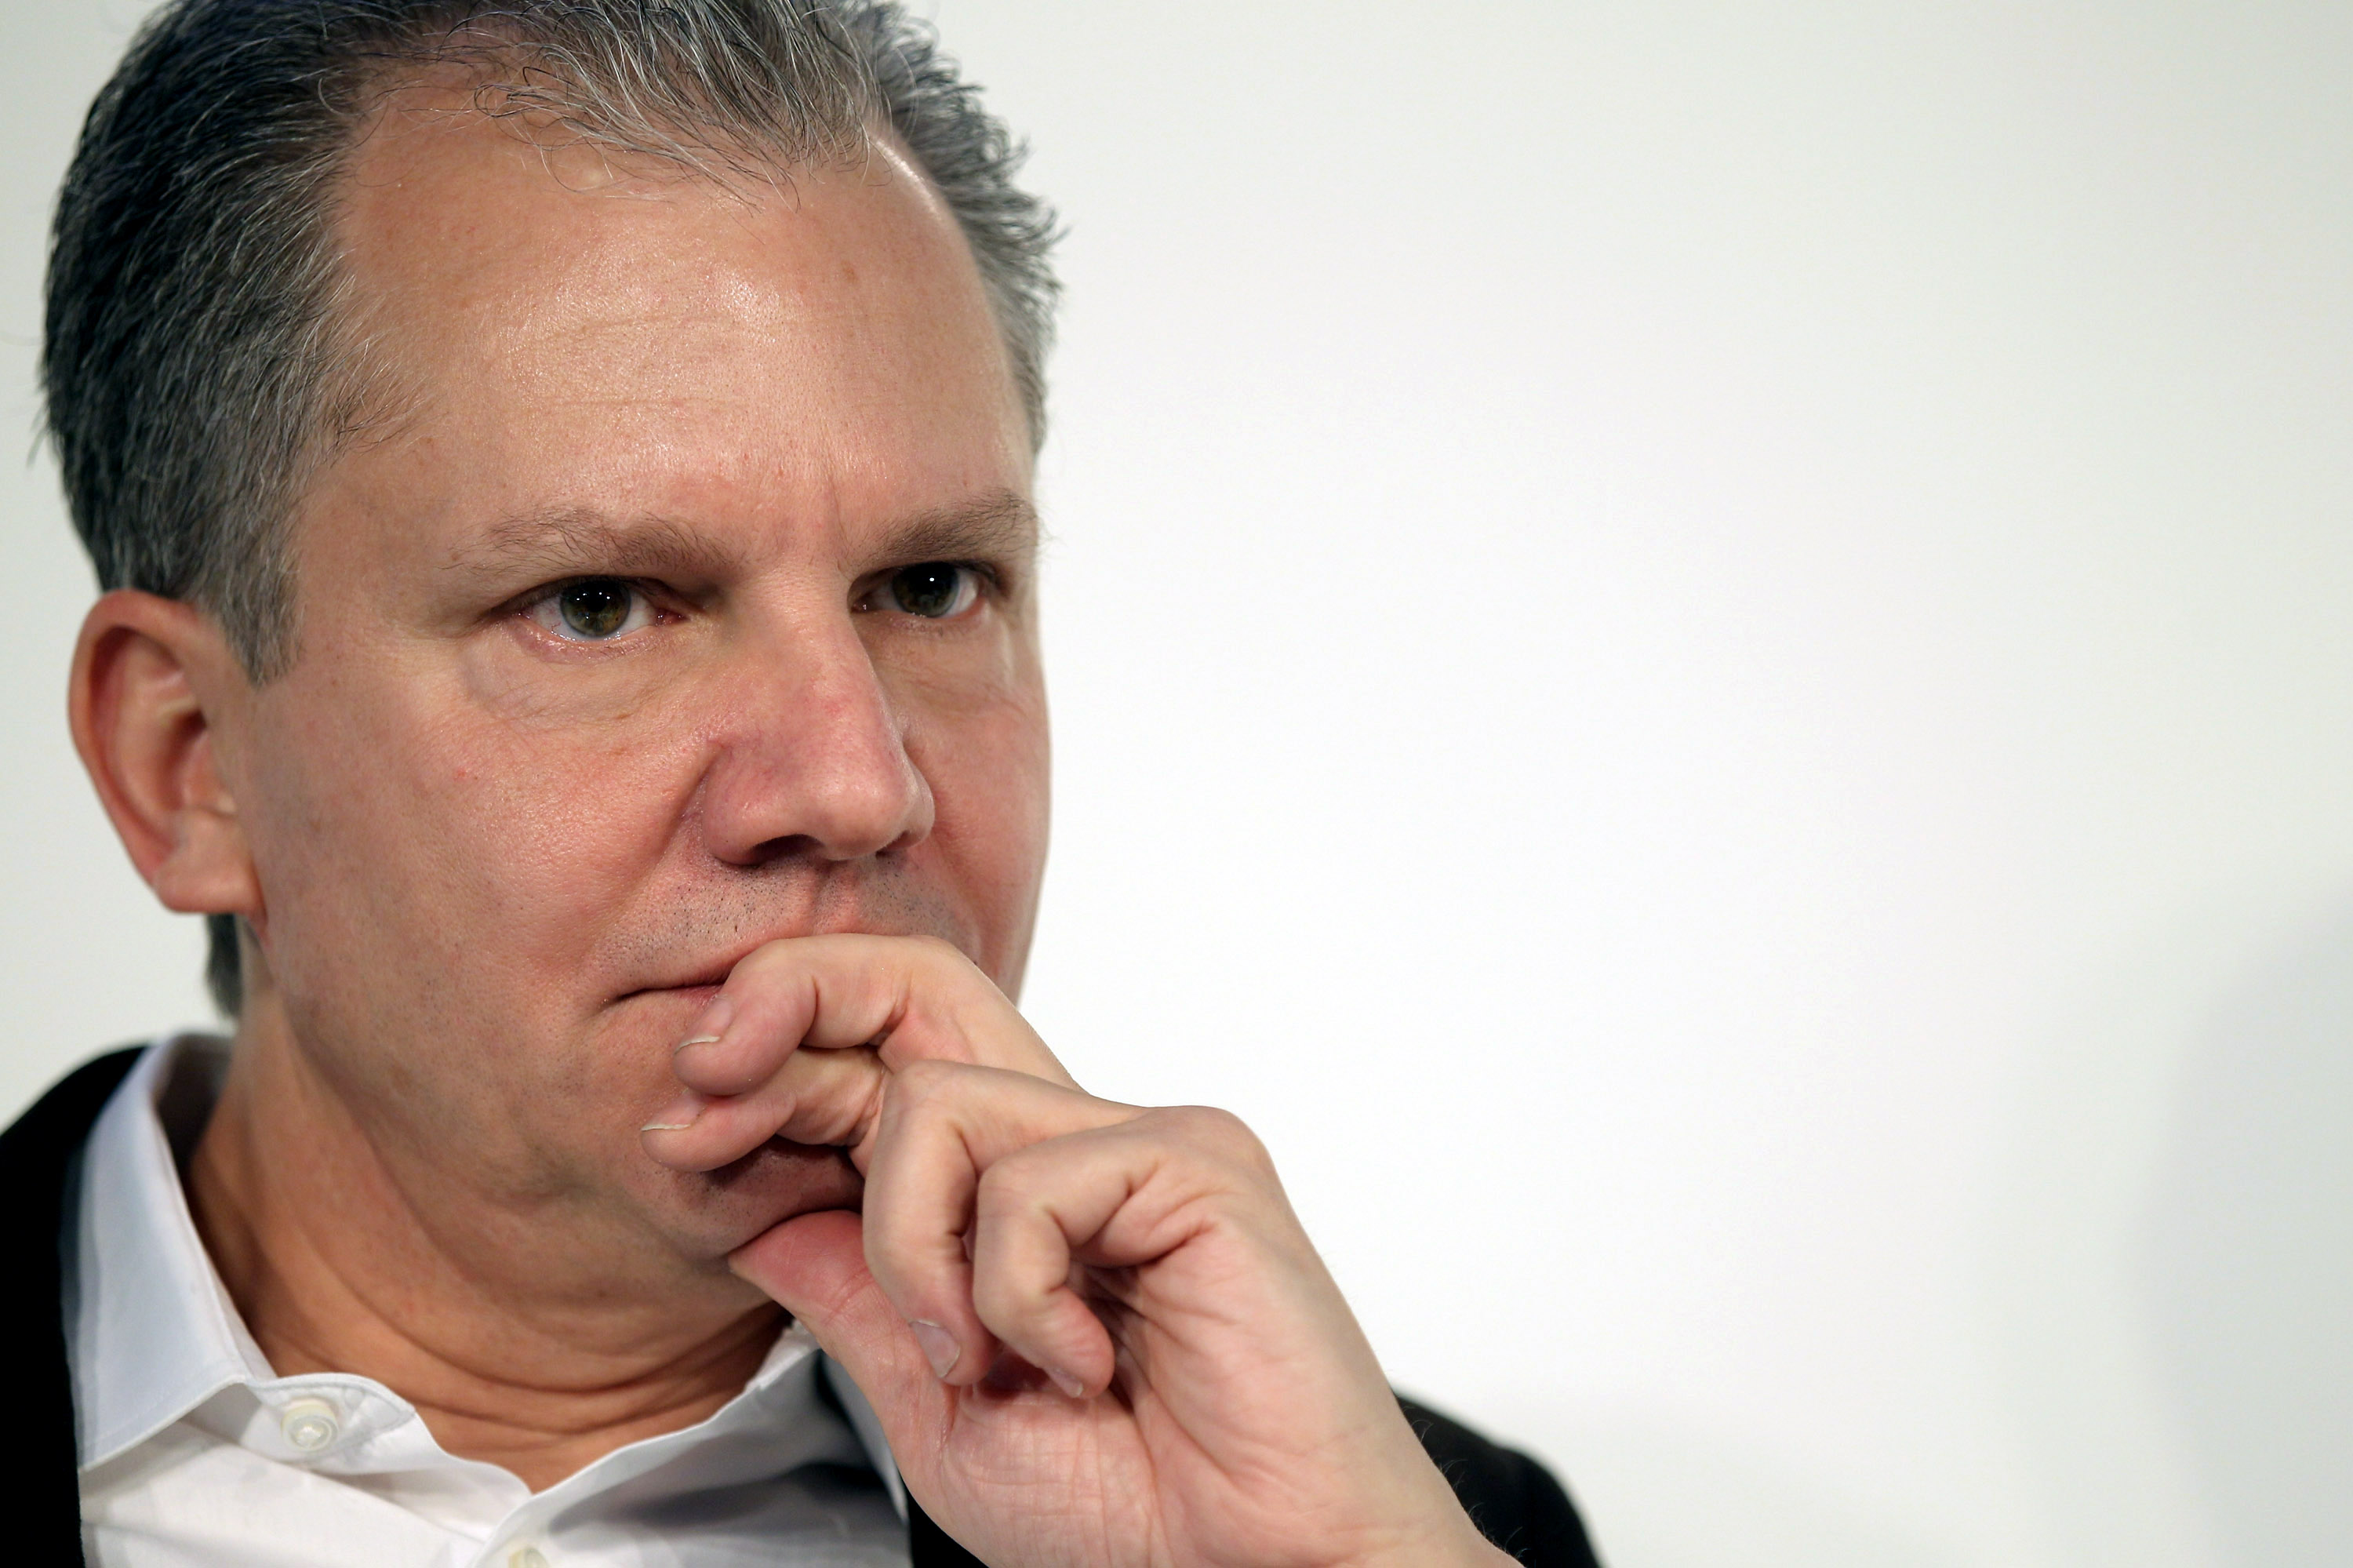 Arthur Sulzberger, chairman and publisher of The New York Times, looks on during the Digital Life Design (DLD) conference (Miguel Villagran—Getty Images)